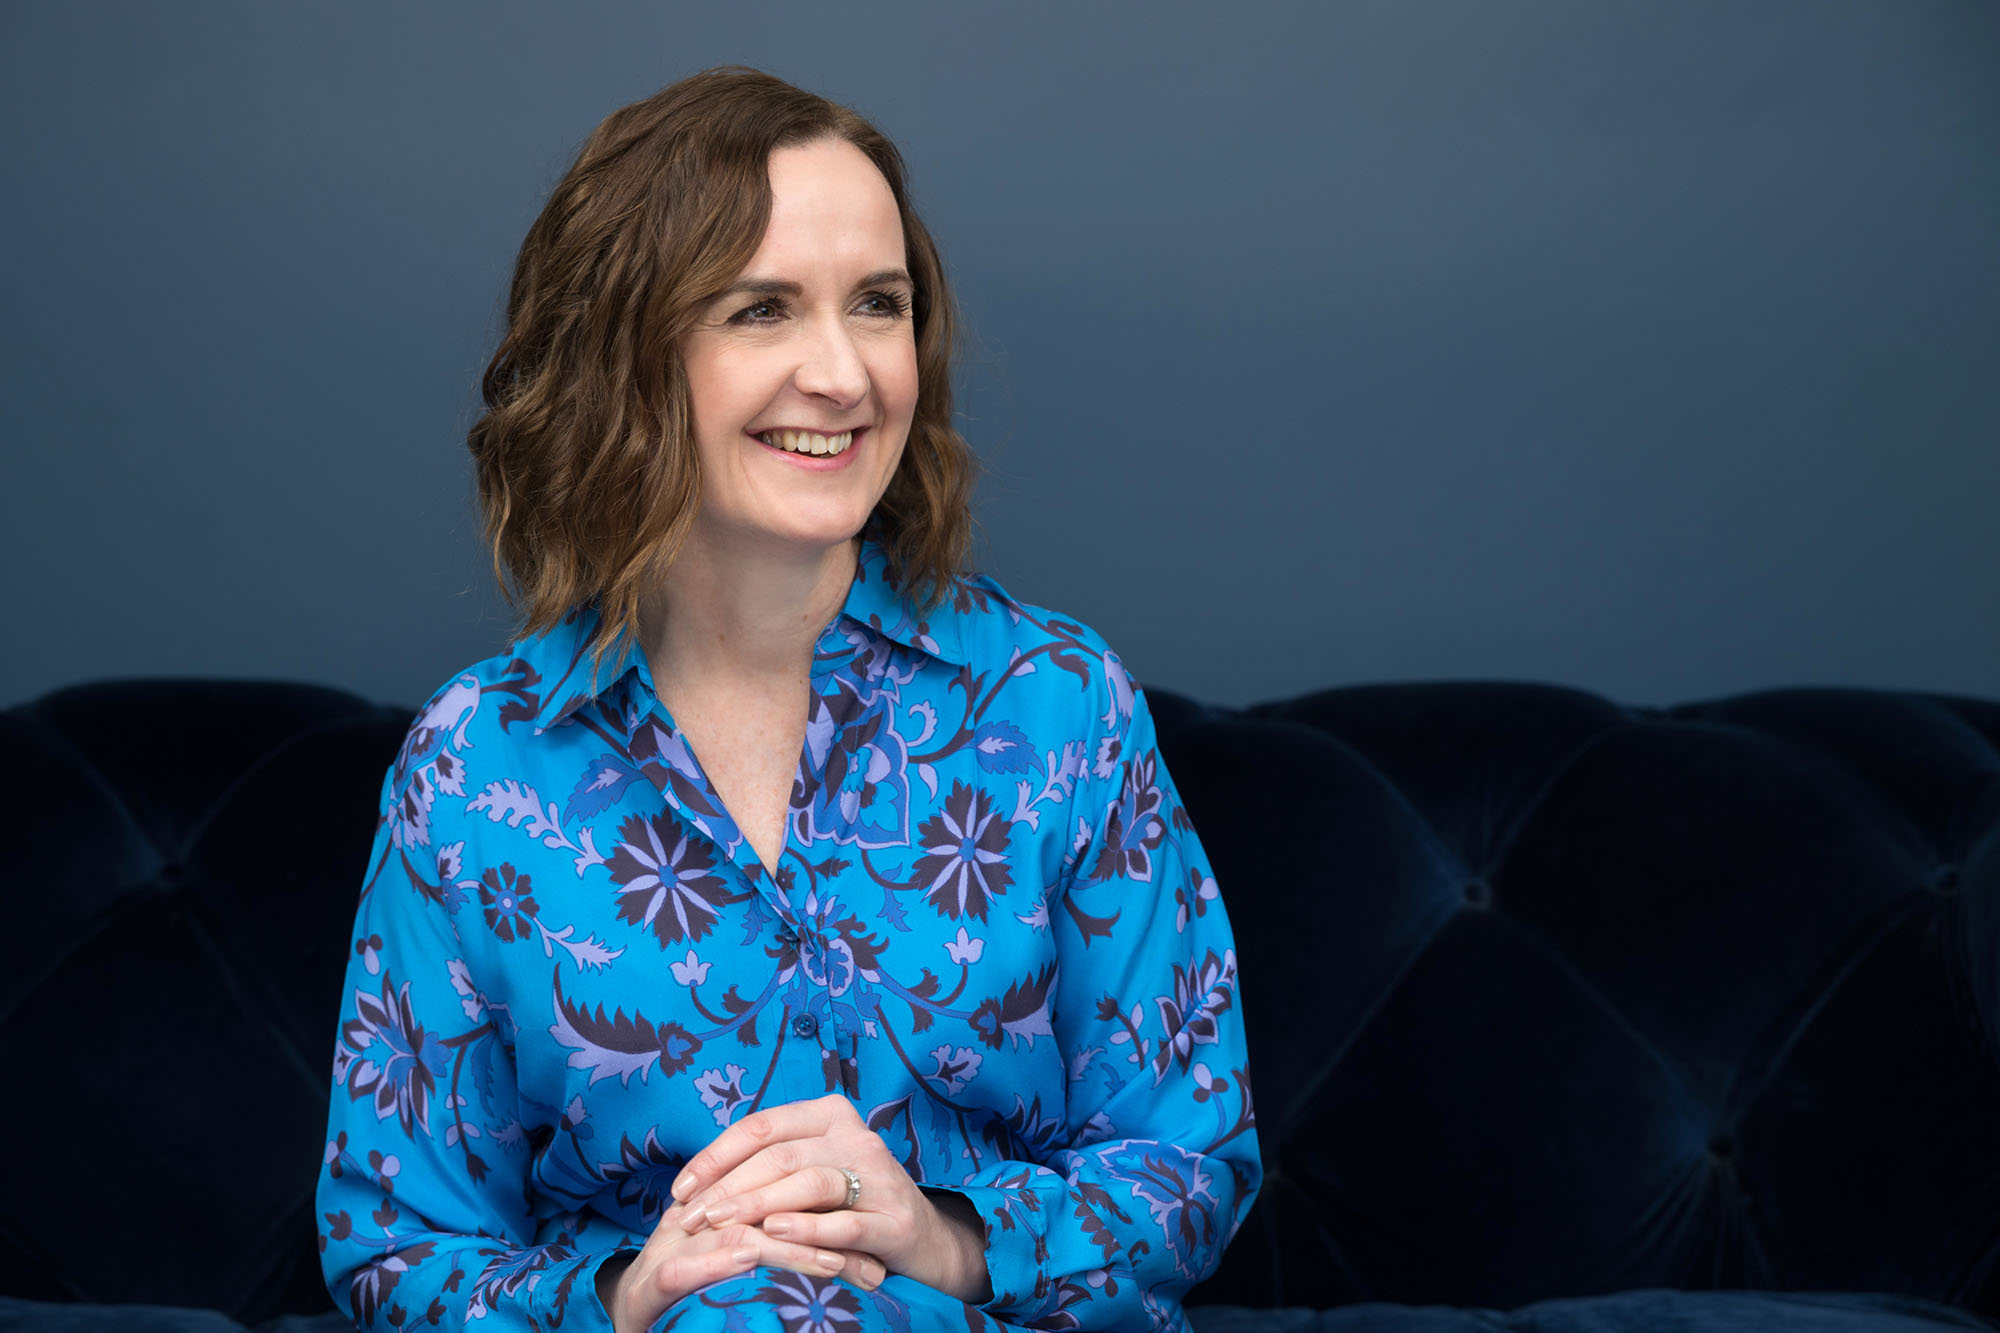 A smiling woman sitting in front of a blue wall during her Croydon personal branding photography shoot